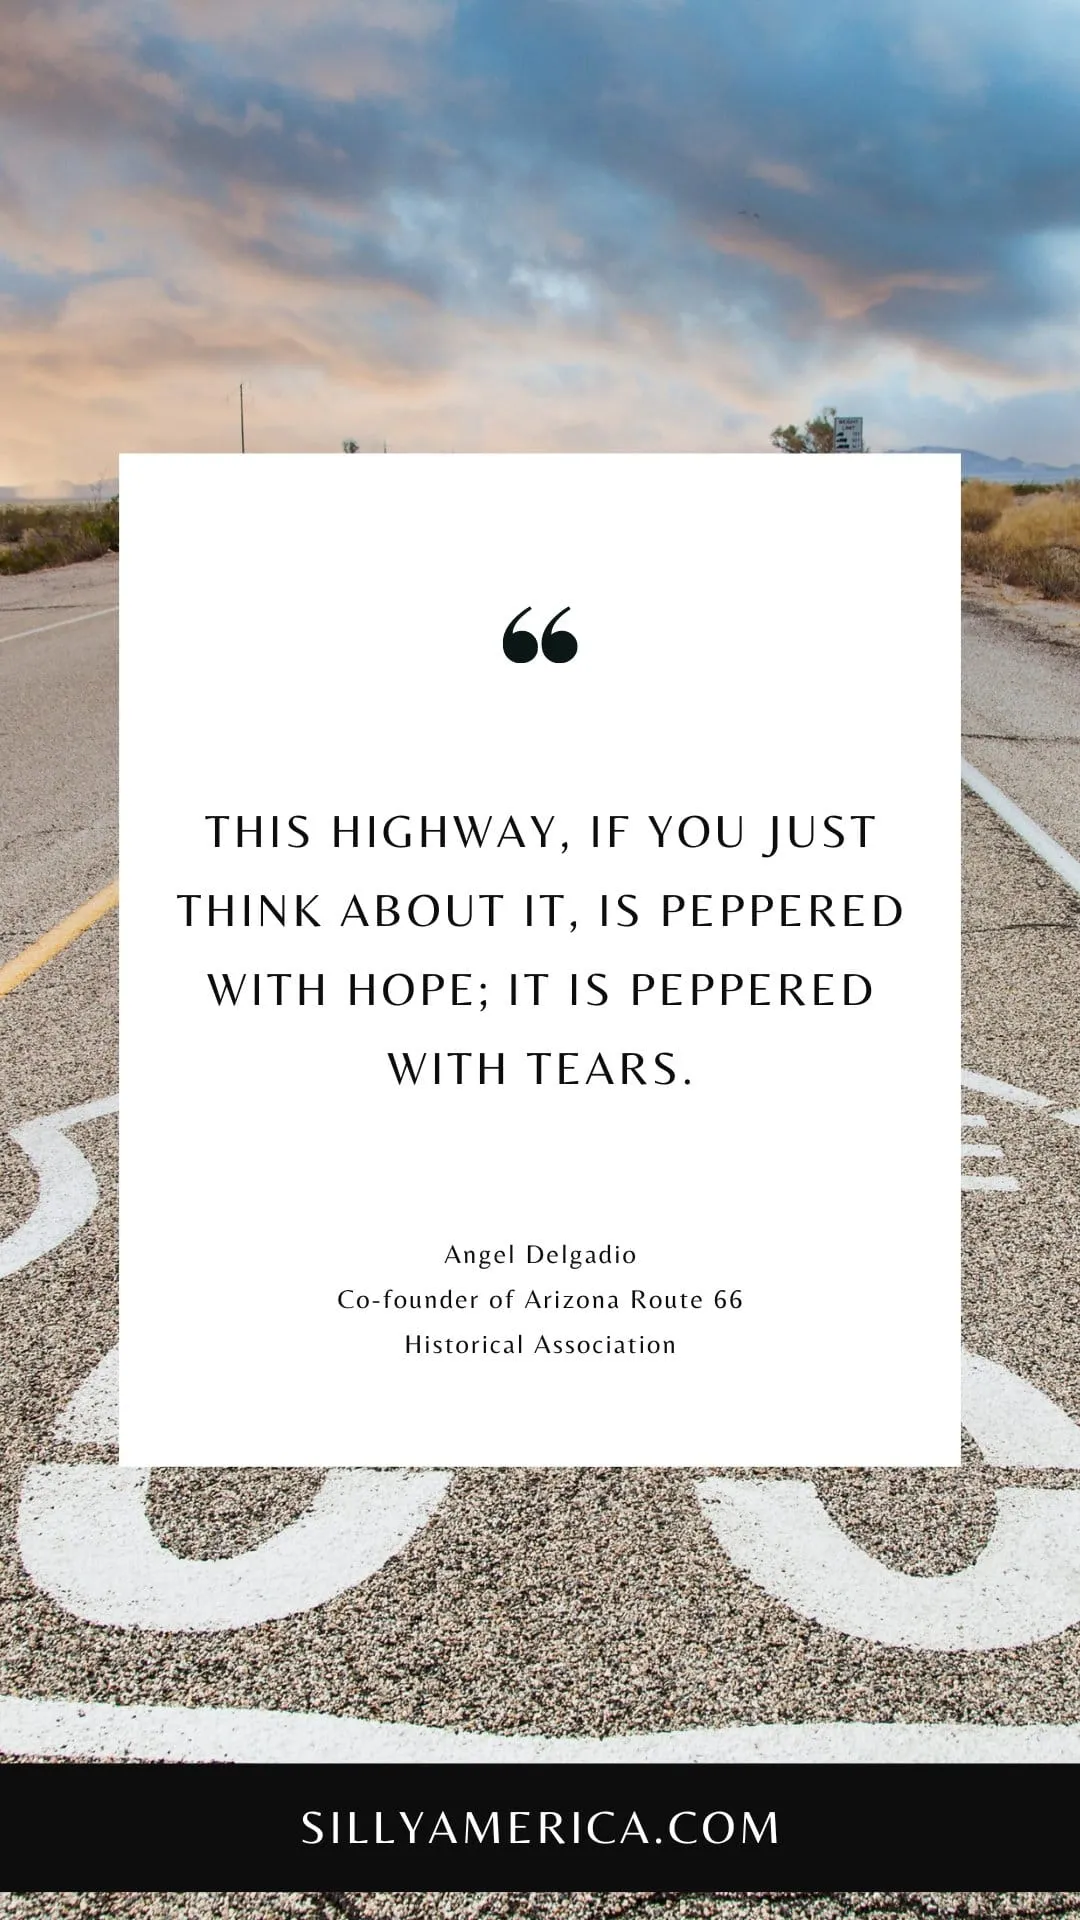 Route 66 Quotes, Sayings, and Phrases - This highway, if you just think about it, is peppered with hope; it is peppered with tears. - Angel Delgadio, co-founder of Arizona Route 66 Historical Association